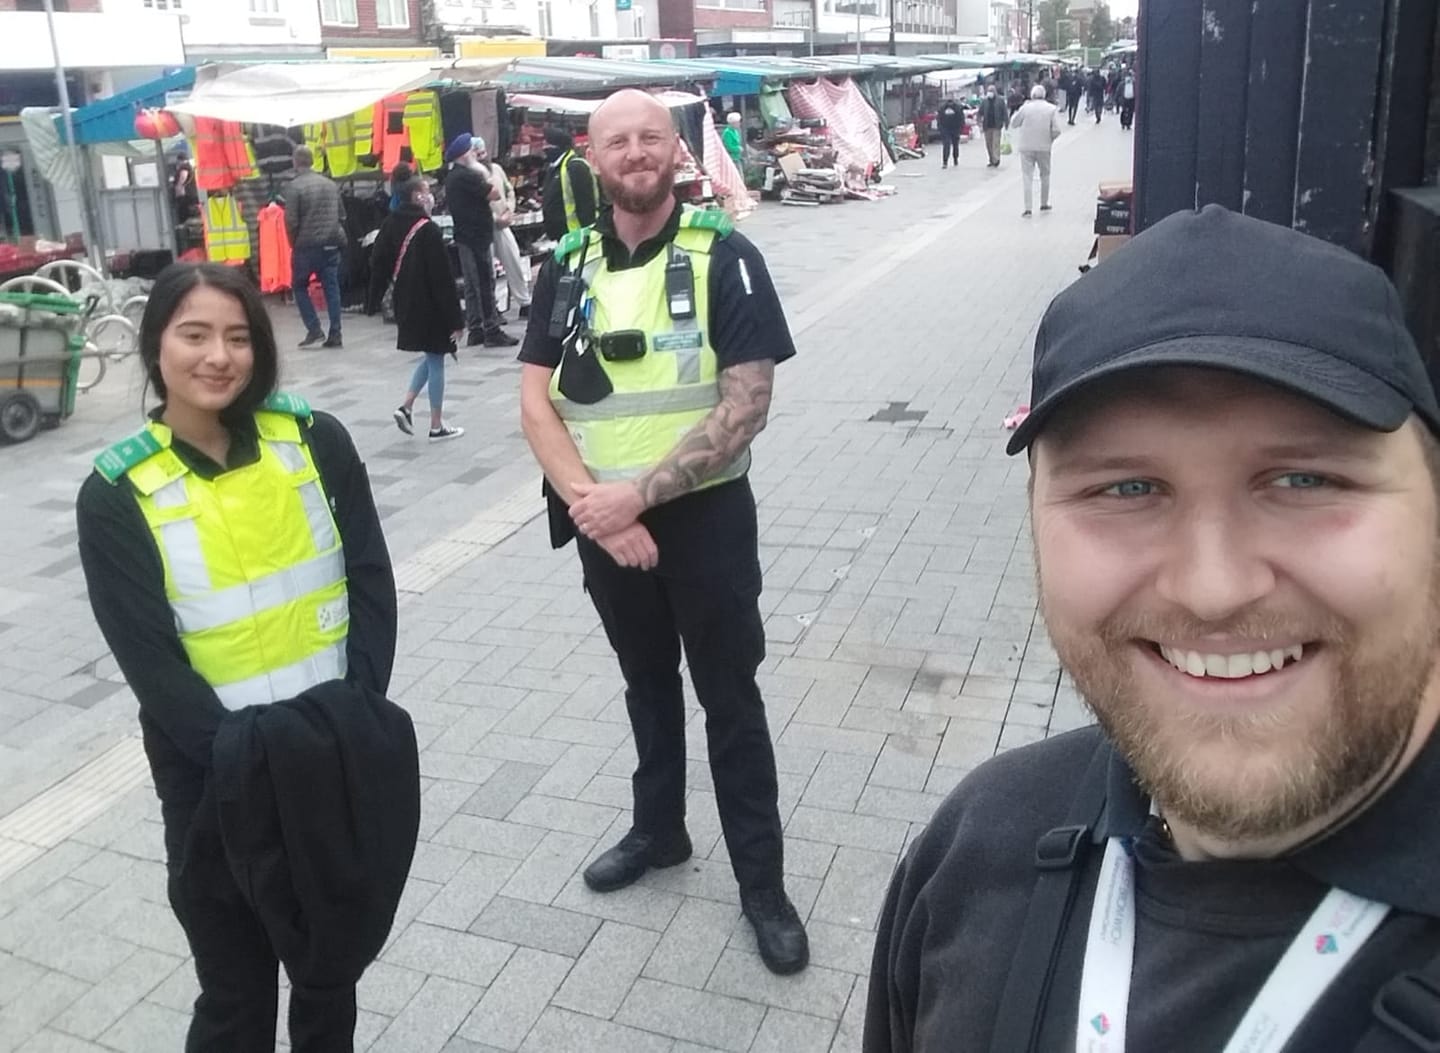 The BID and Sandwell Council Joint Patrols